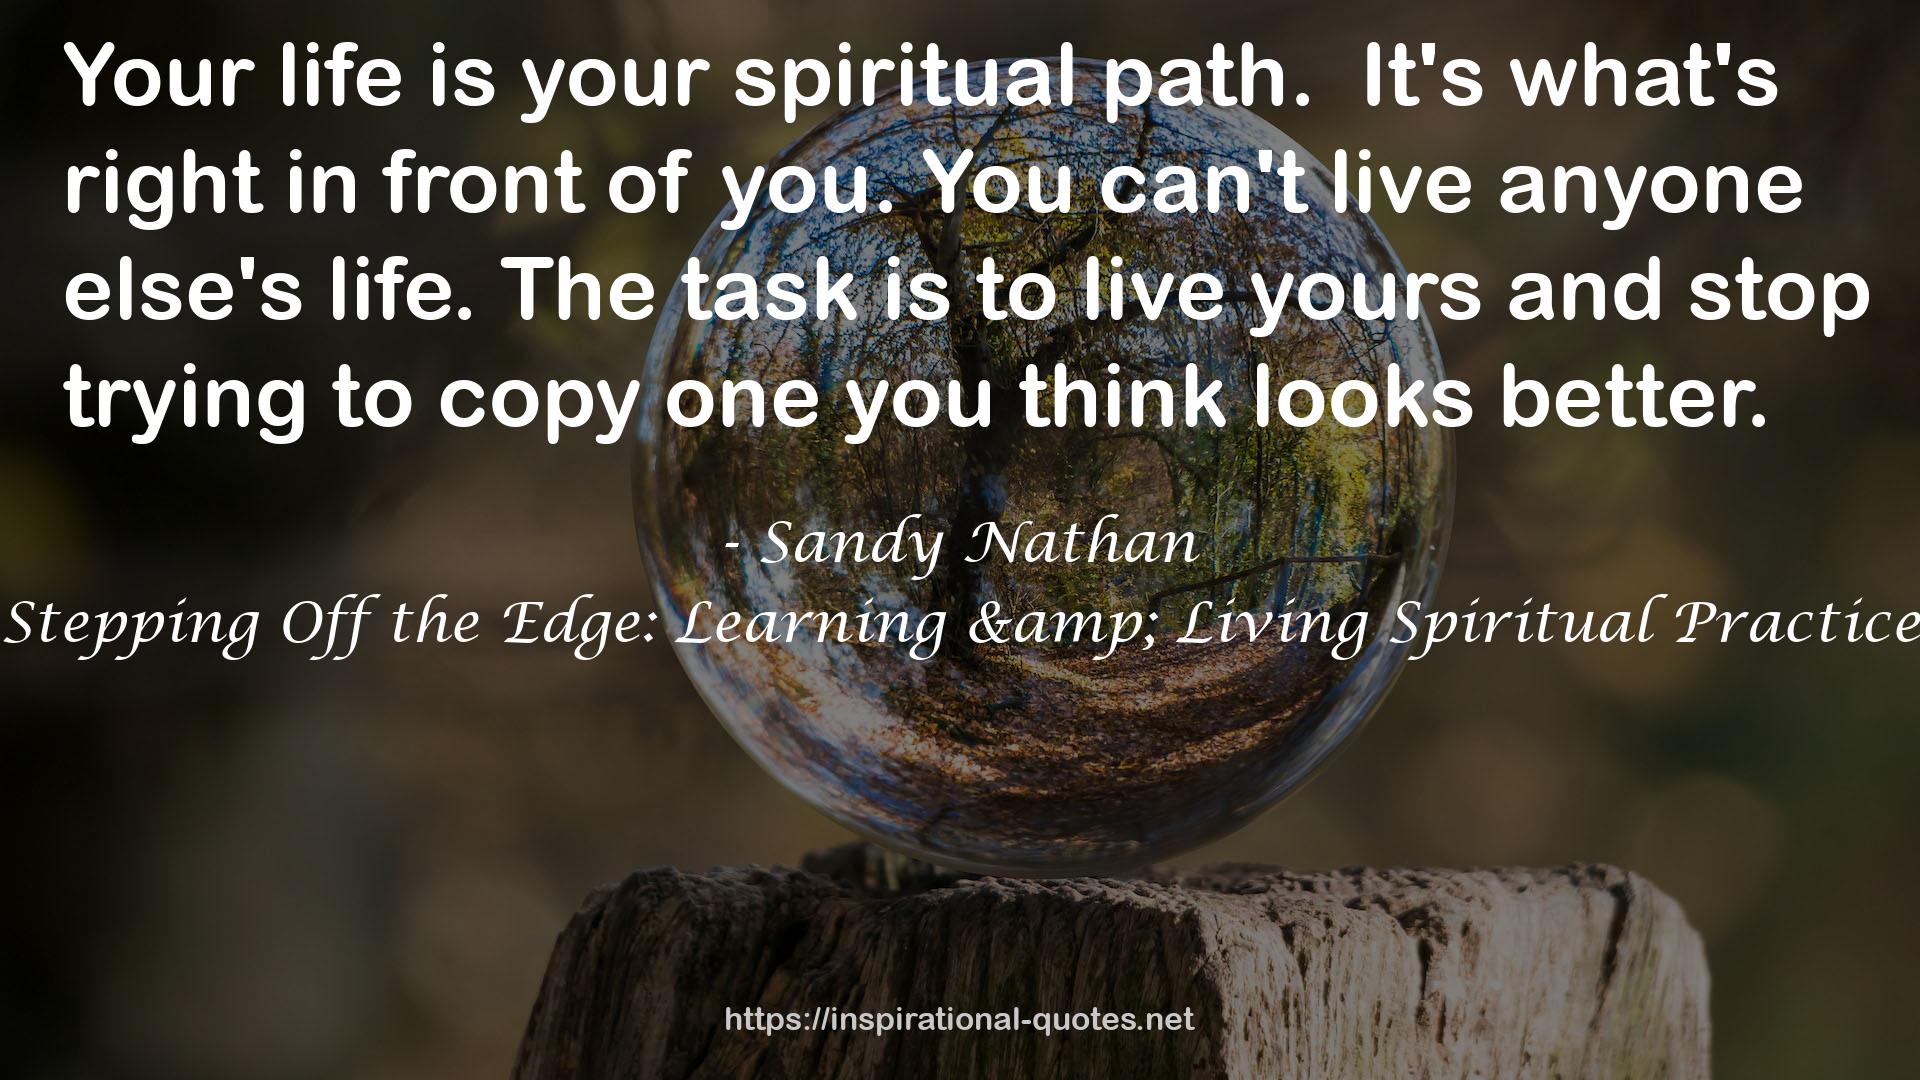 Stepping Off the Edge: Learning & Living Spiritual Practice QUOTES